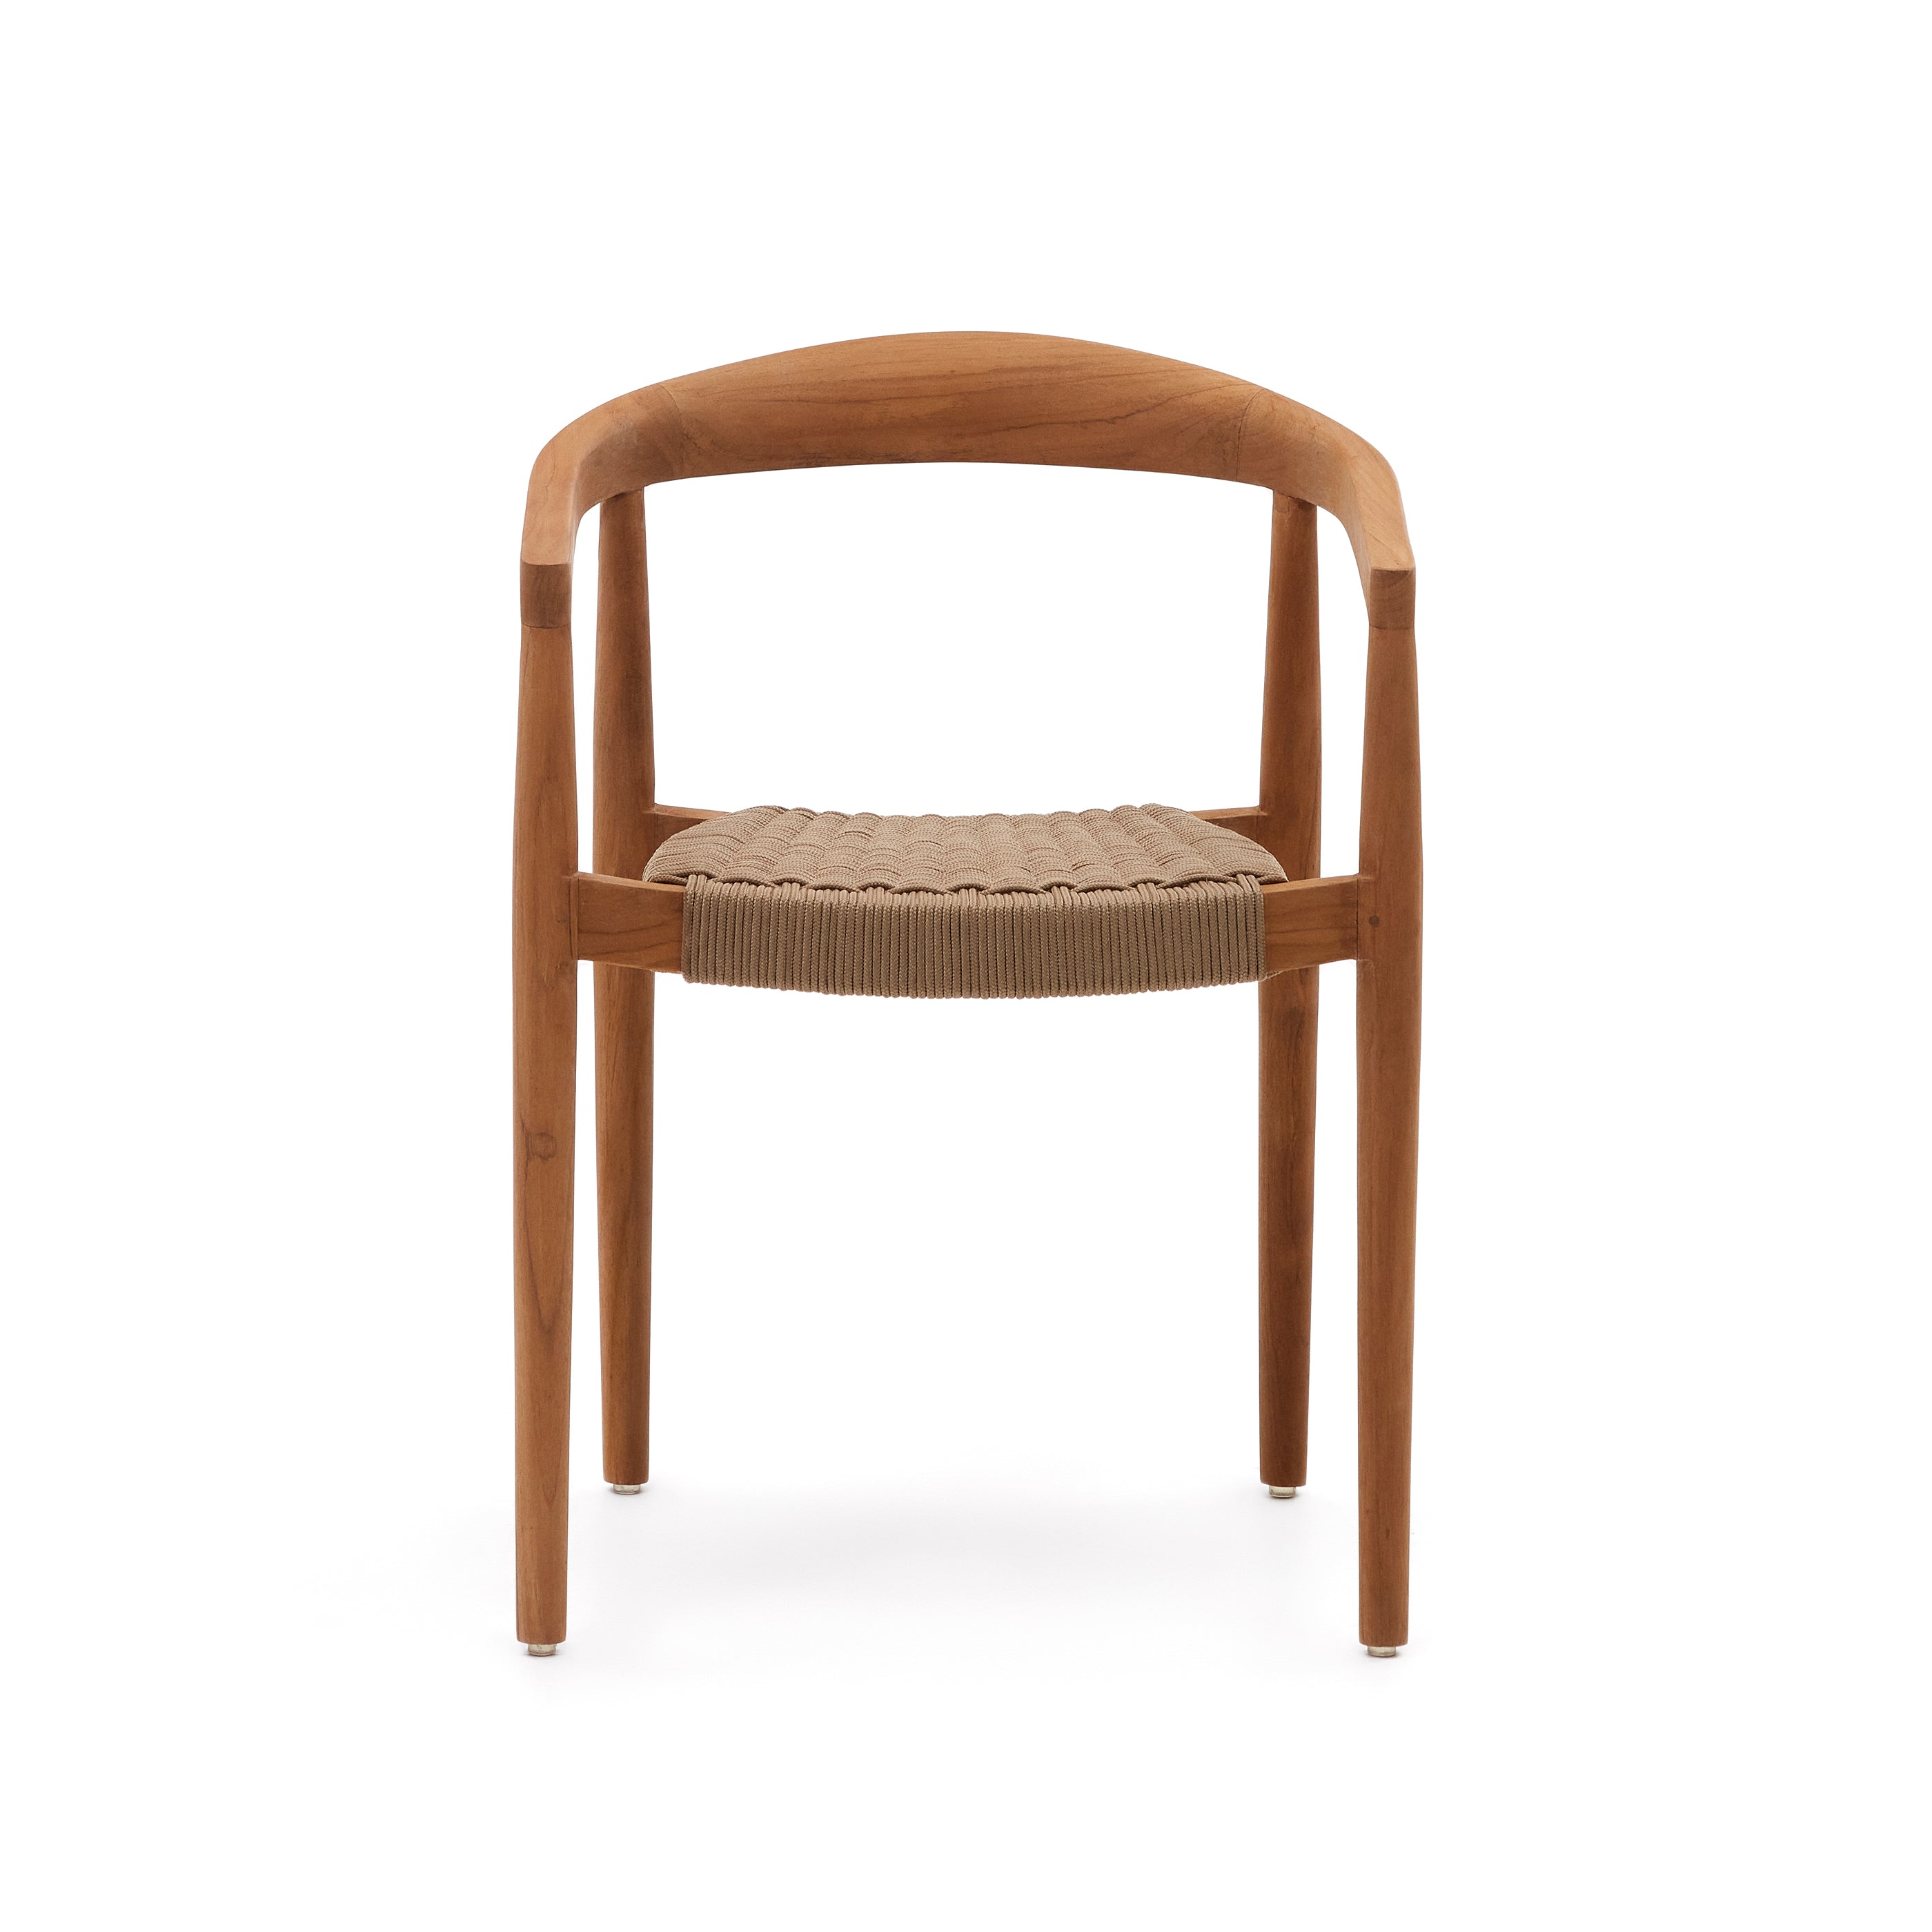 Ydalia stackable outdoor chair in solid teak wood with natural finish and beige rope